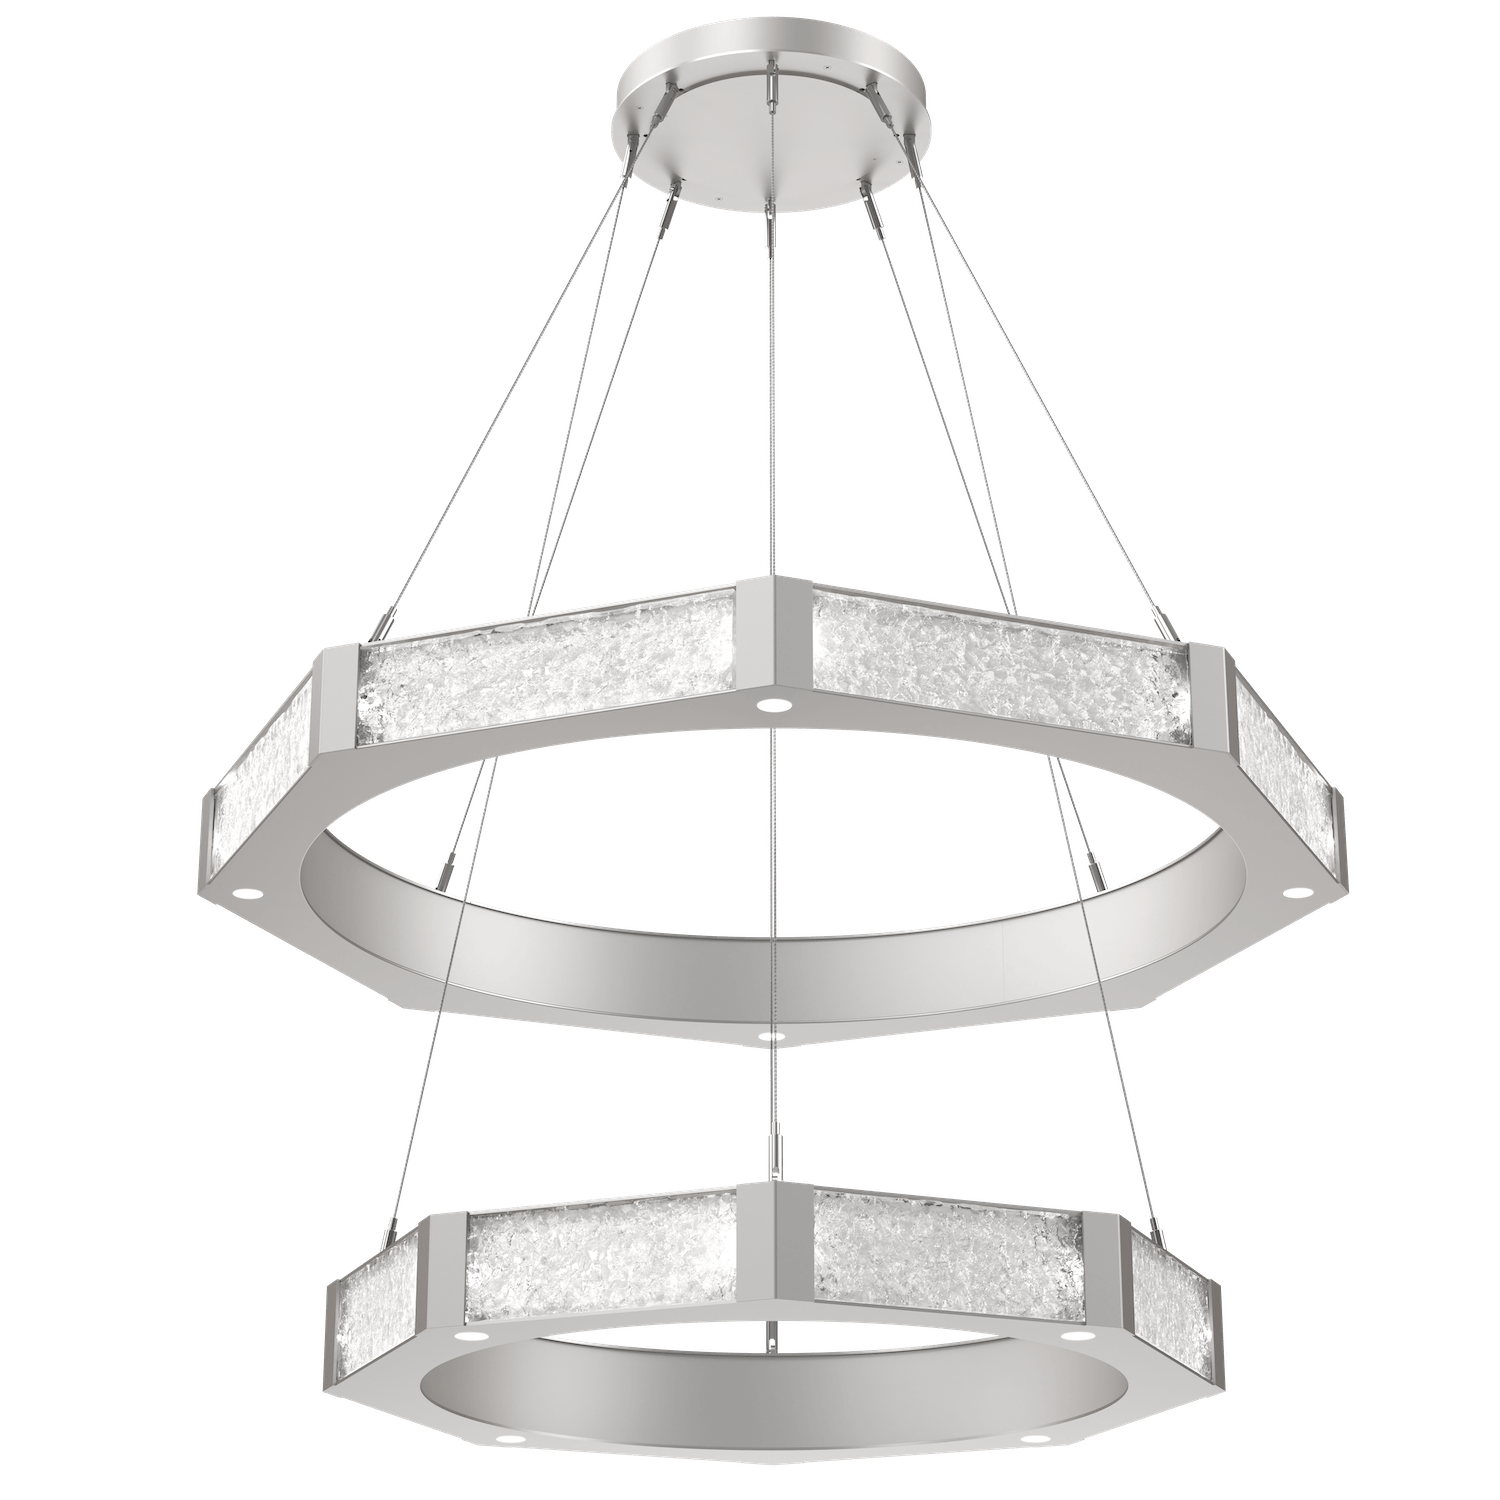 CHB0061-2B-BS-GC-Hammerton-Studio-Glacier-48-inch-two-tier-ring-chandelier-with-metallic-beige-silver-finish-and-clear-blown-glass-with-geo-clear-cast-glass-diffusers-and-LED-lamping